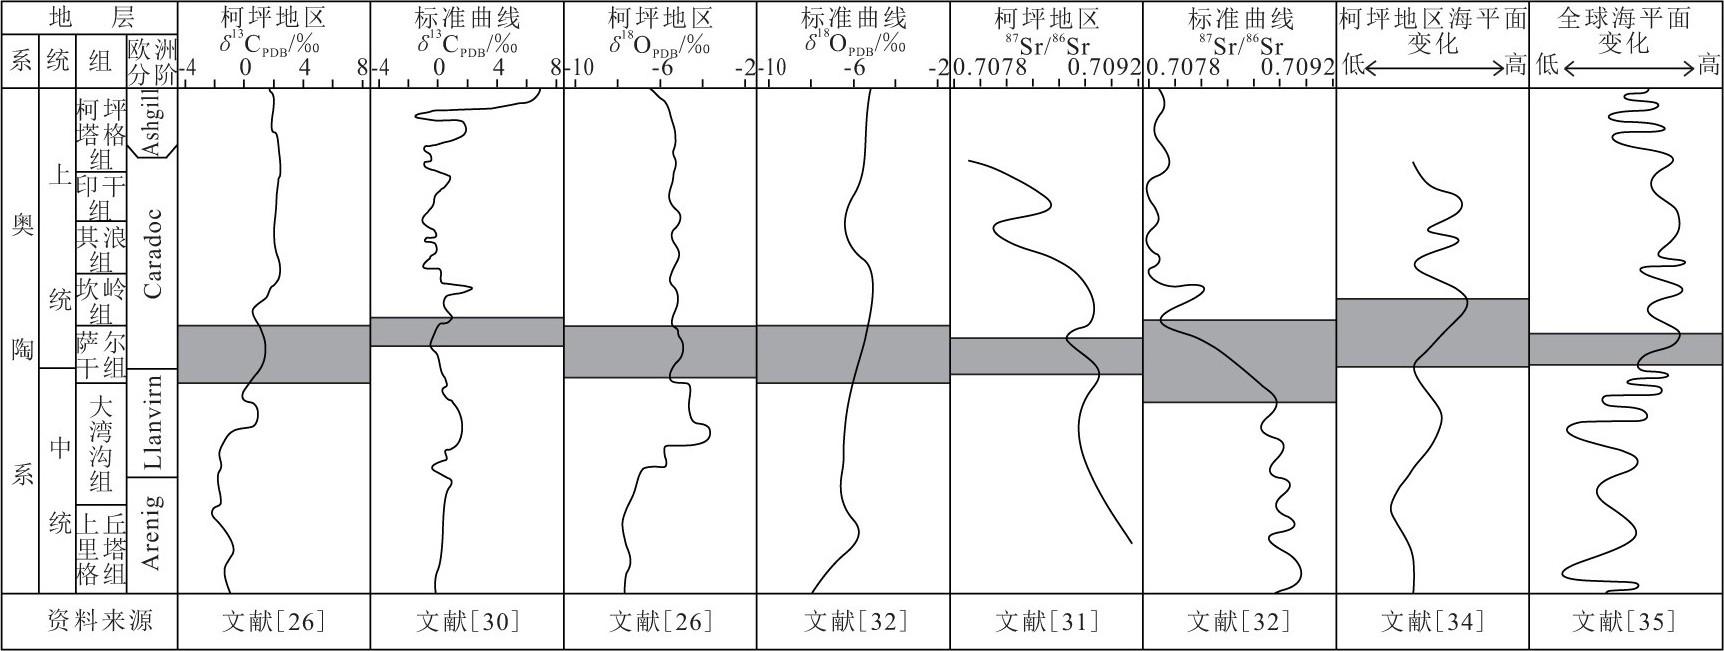 ͼ3 幵Caradocڴȱ¼Ҫ (ɫִ¼) ȫԶԱFig.3 Major characteristics of the early Caradoc oceanic anoxic event at Dawangou section (grey rectagles showing the event) and correlation across the world